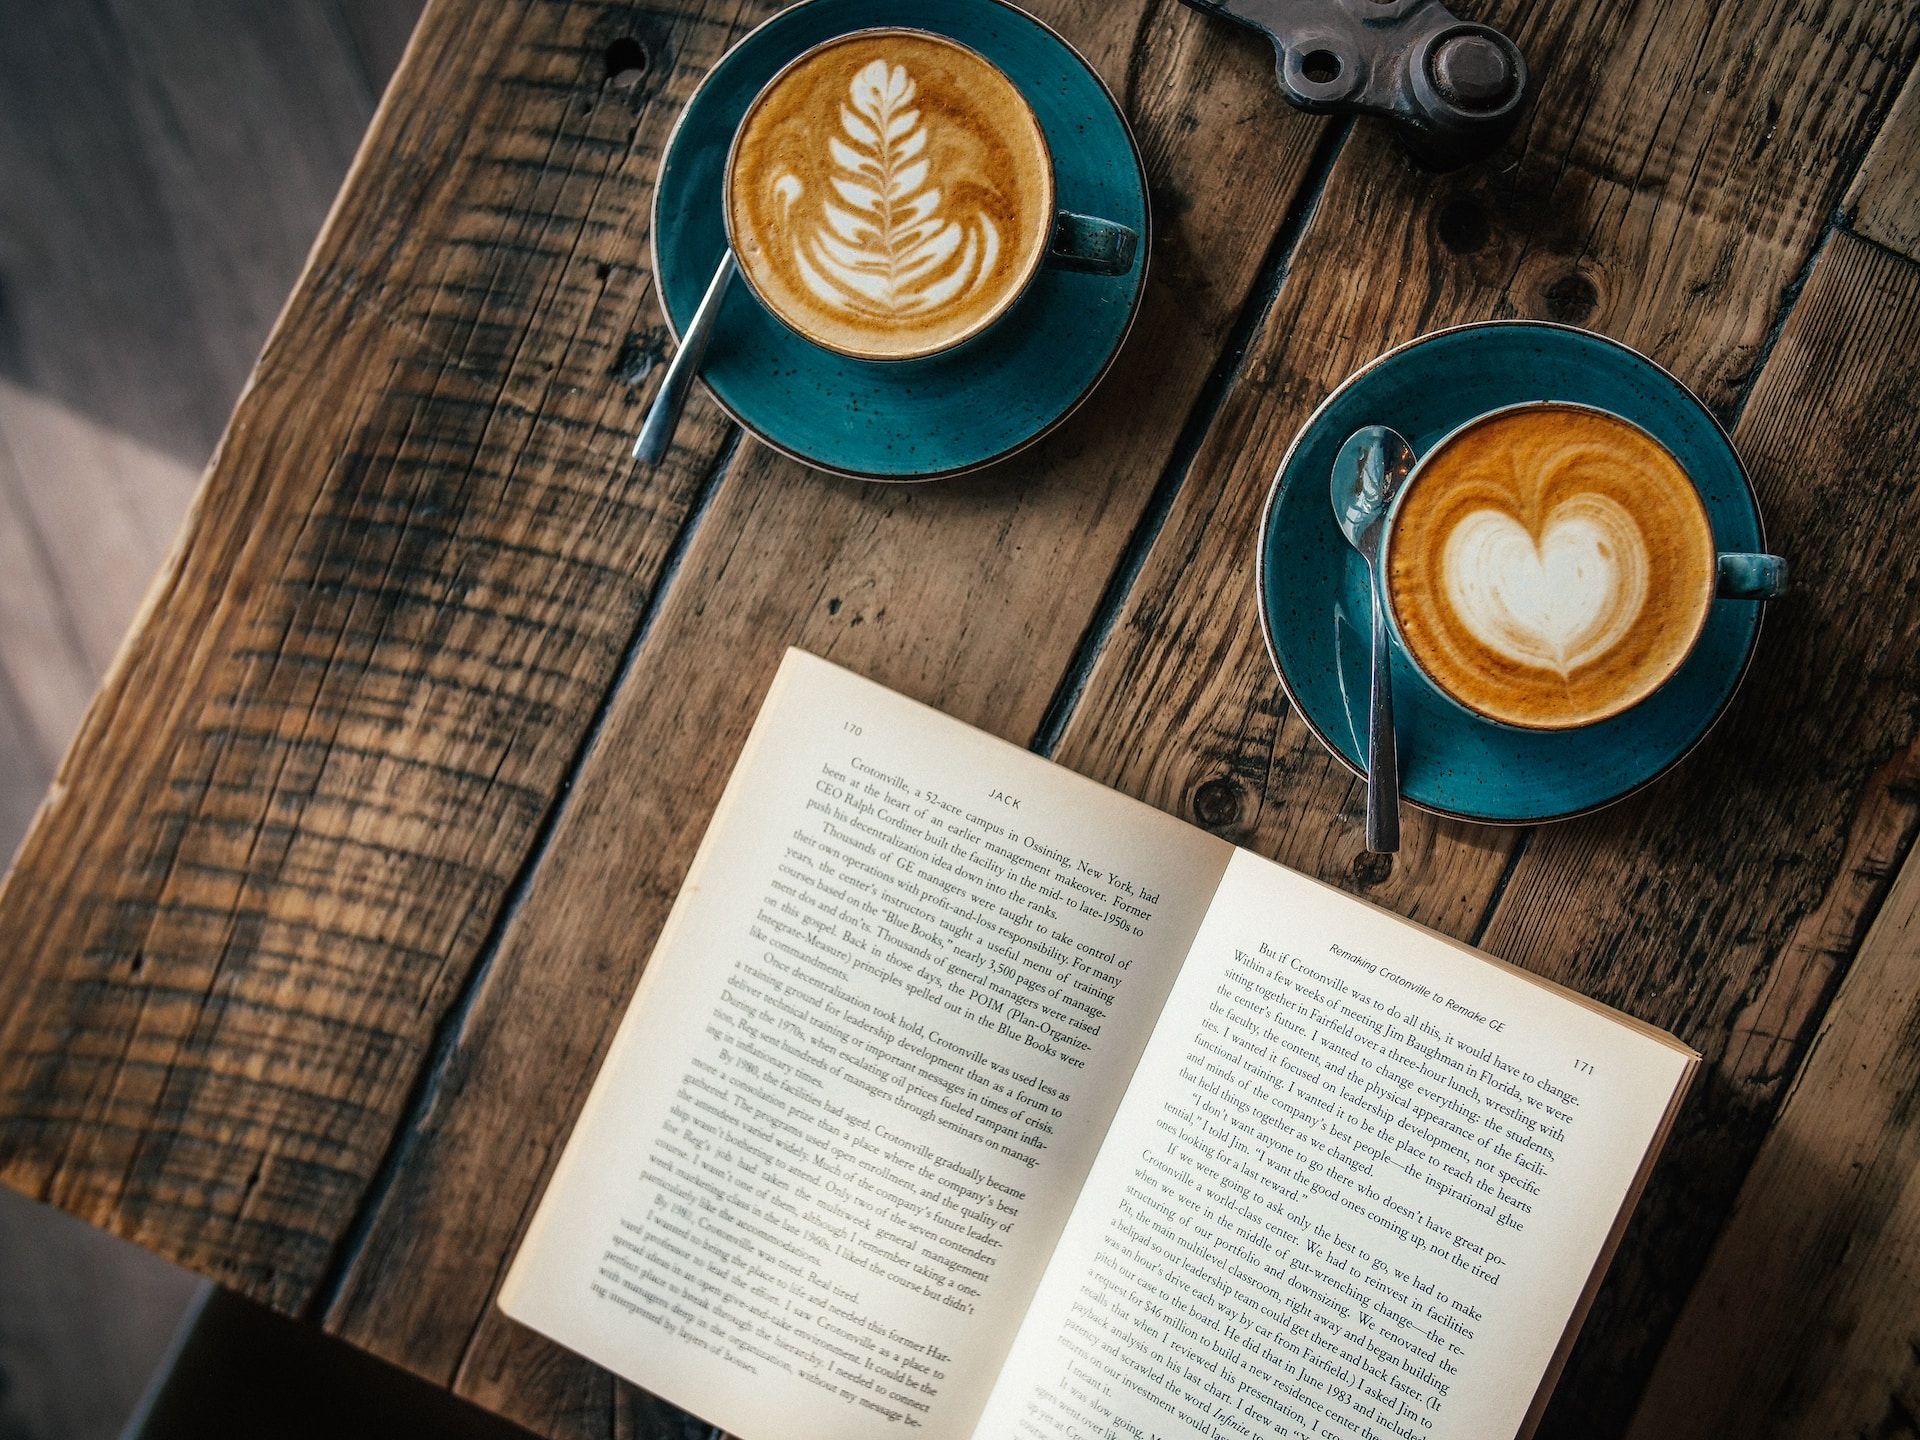 Two well-made coffees sat ahead of an open book on a wooden table